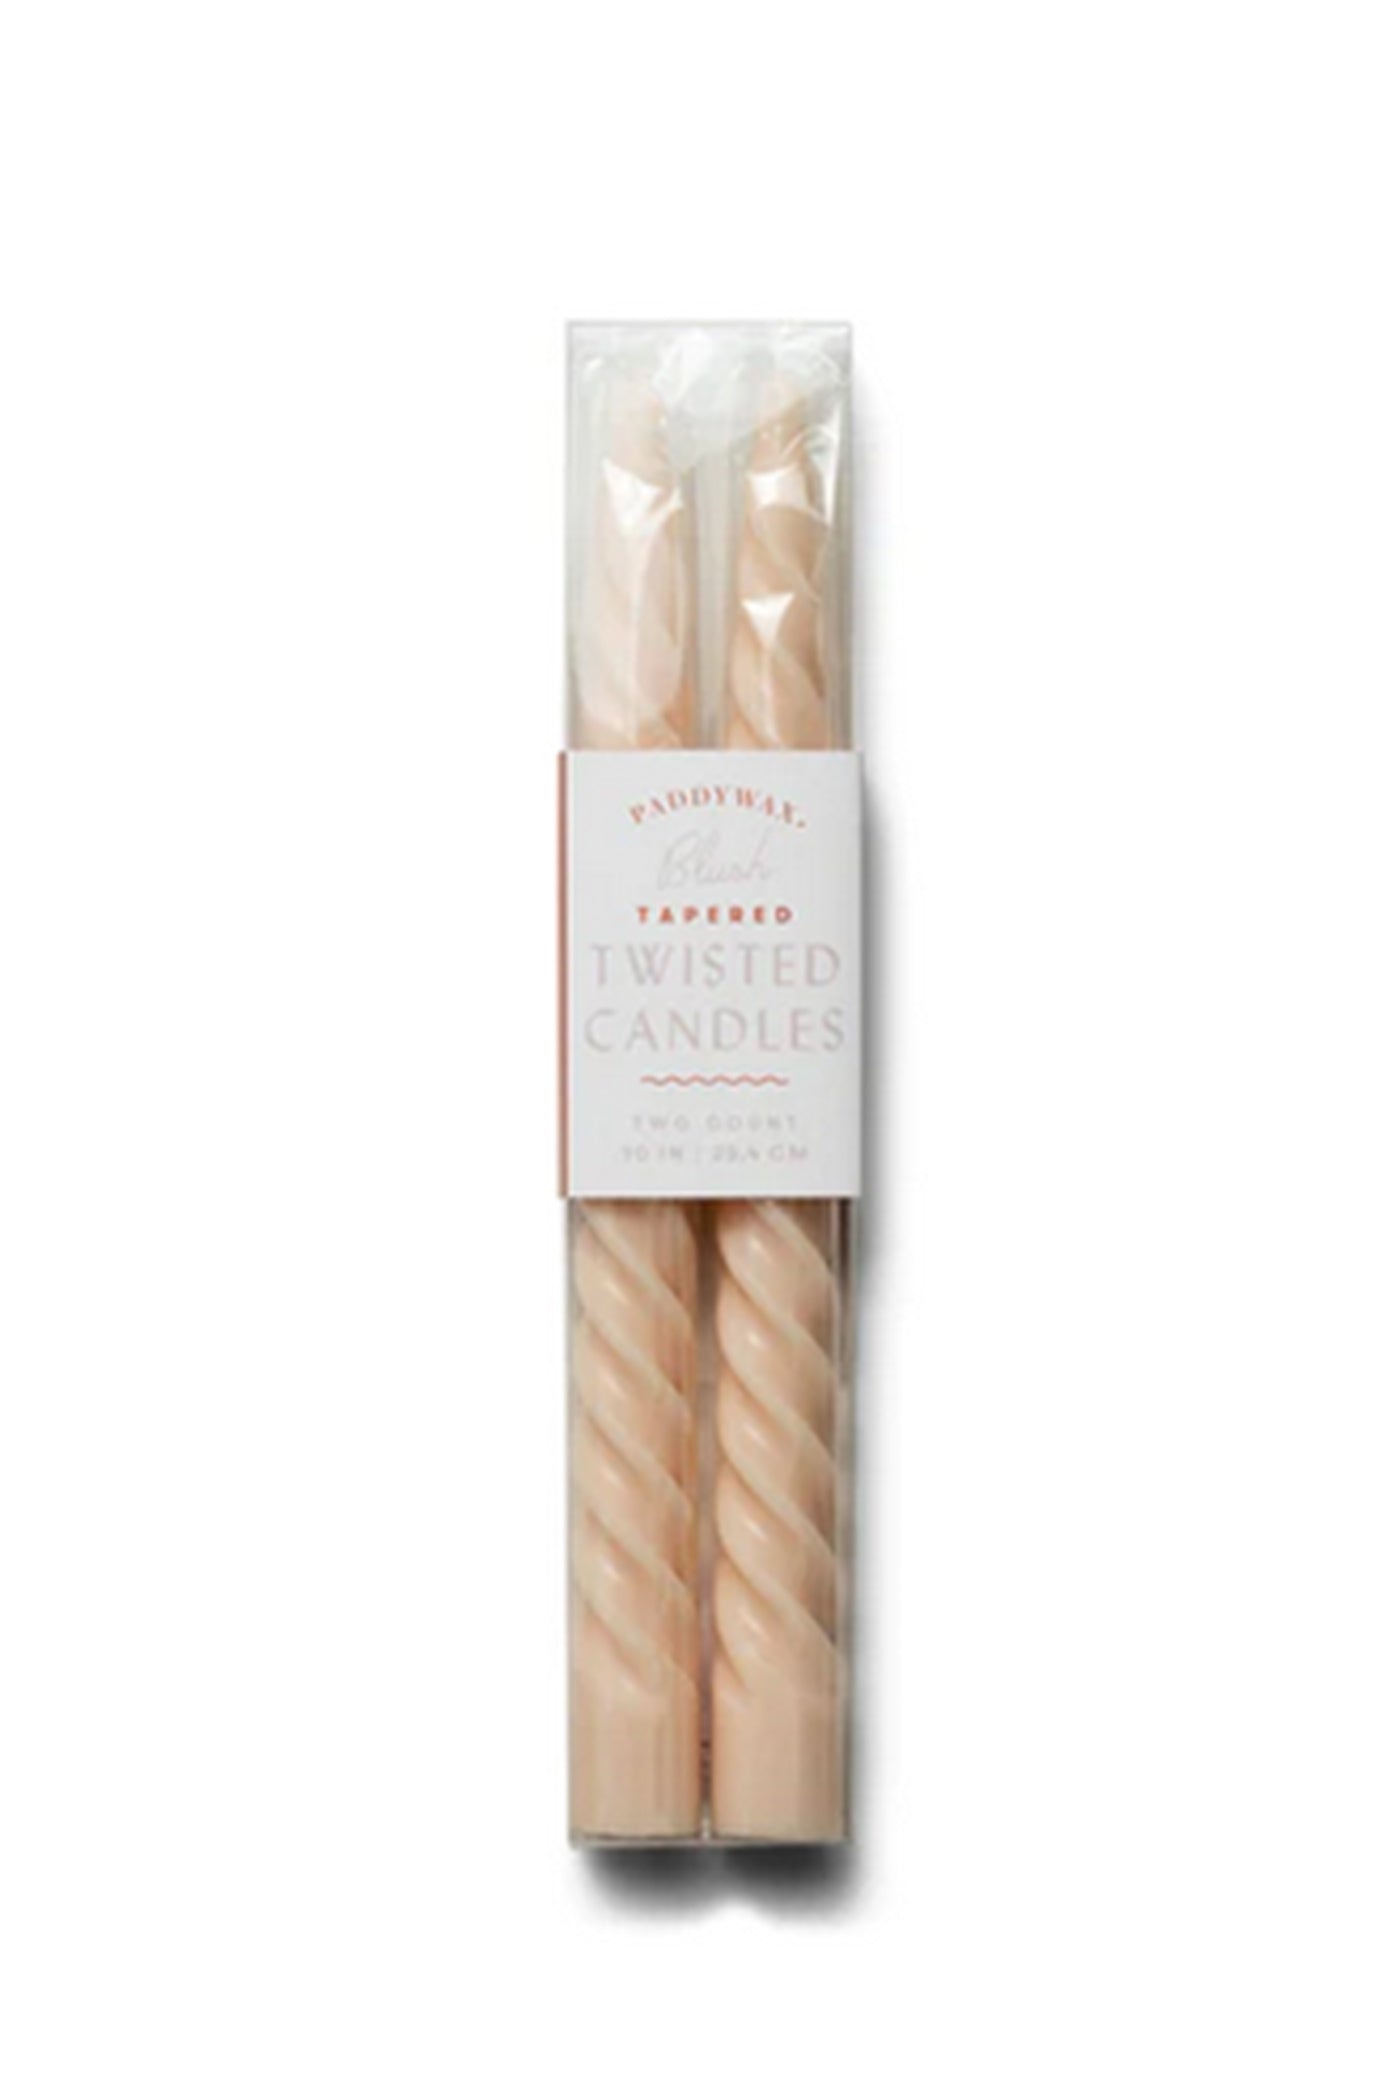 Blush Twisted Taper Candles by Paddywax